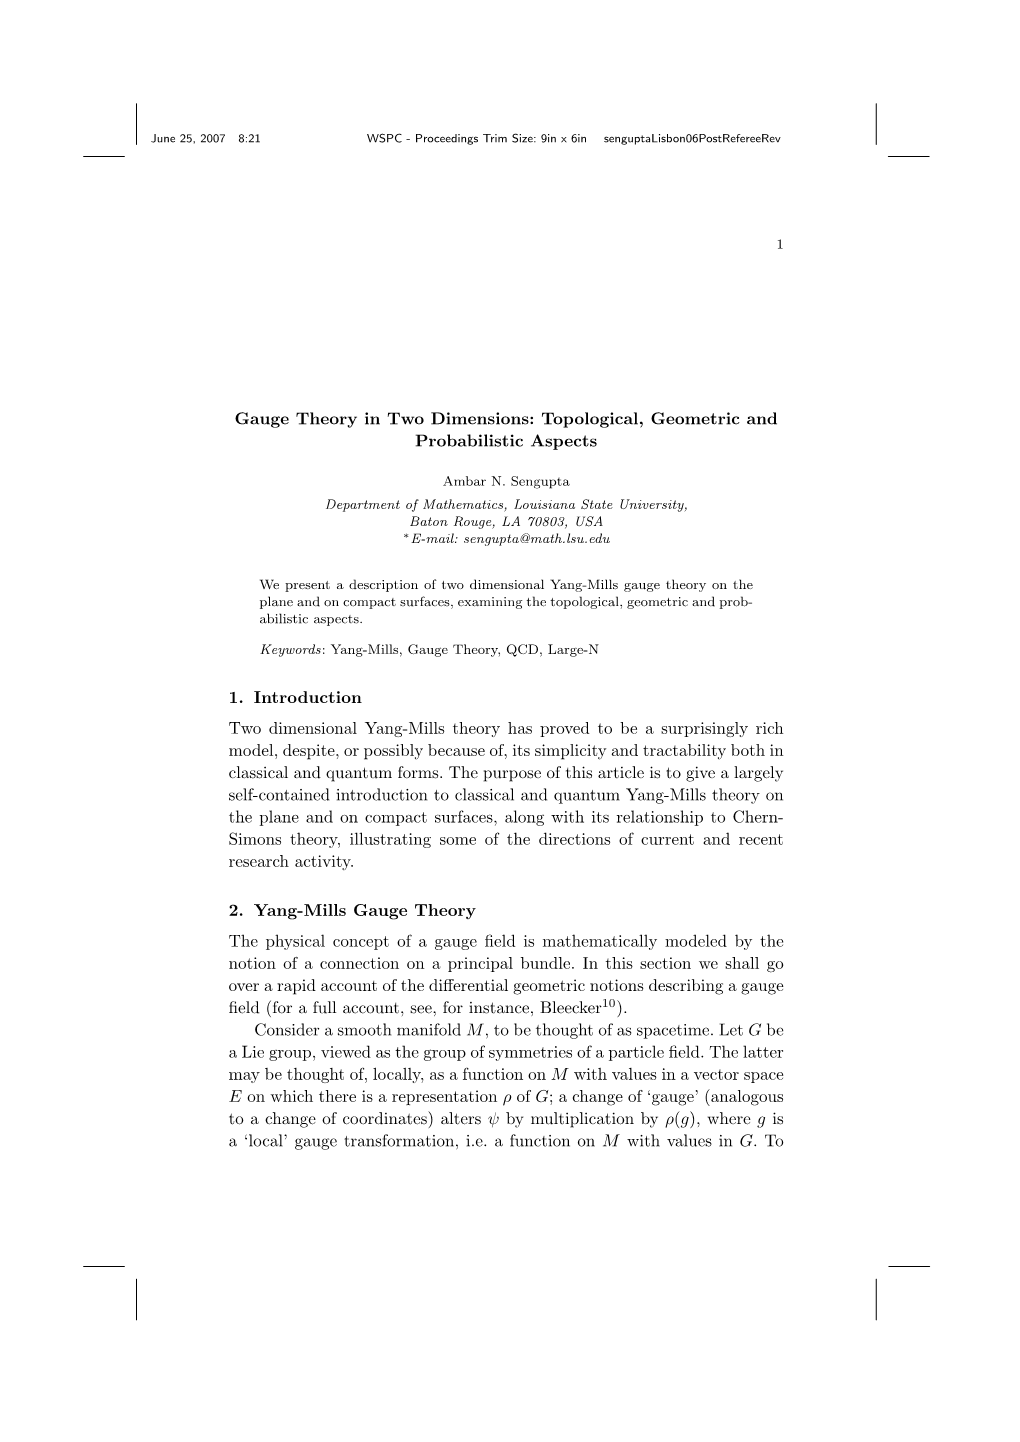 Gauge Theory in Two Dimensions: Topological, Geometric and Probabilistic Aspects